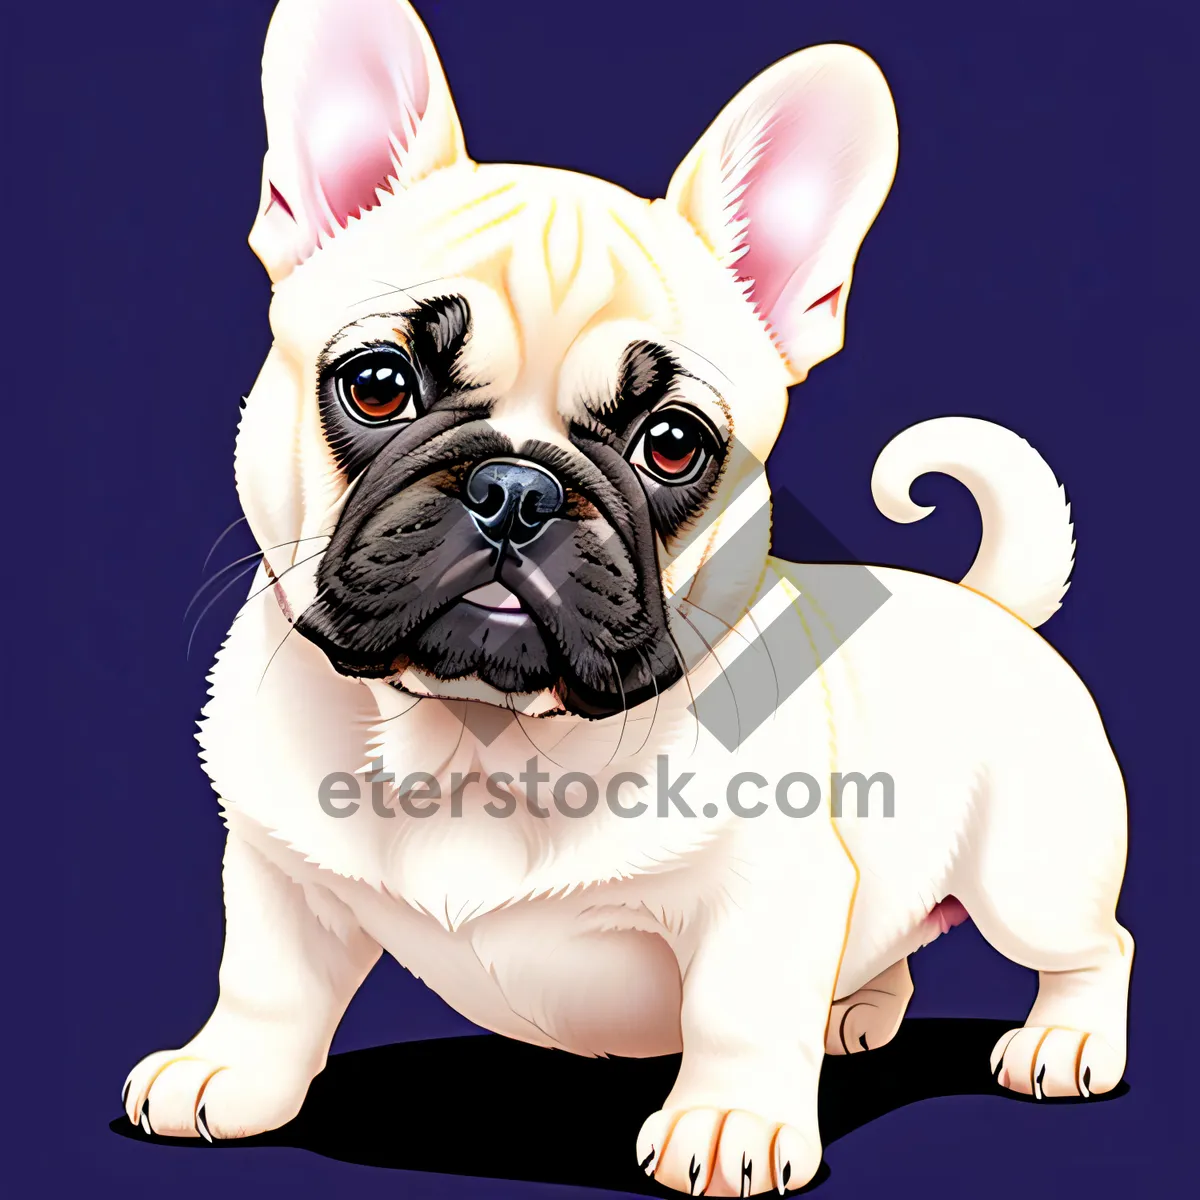 Picture of Bulldog puppy with endearing wrinkles and an irresistibly cute expression, capturing hearts with its charm